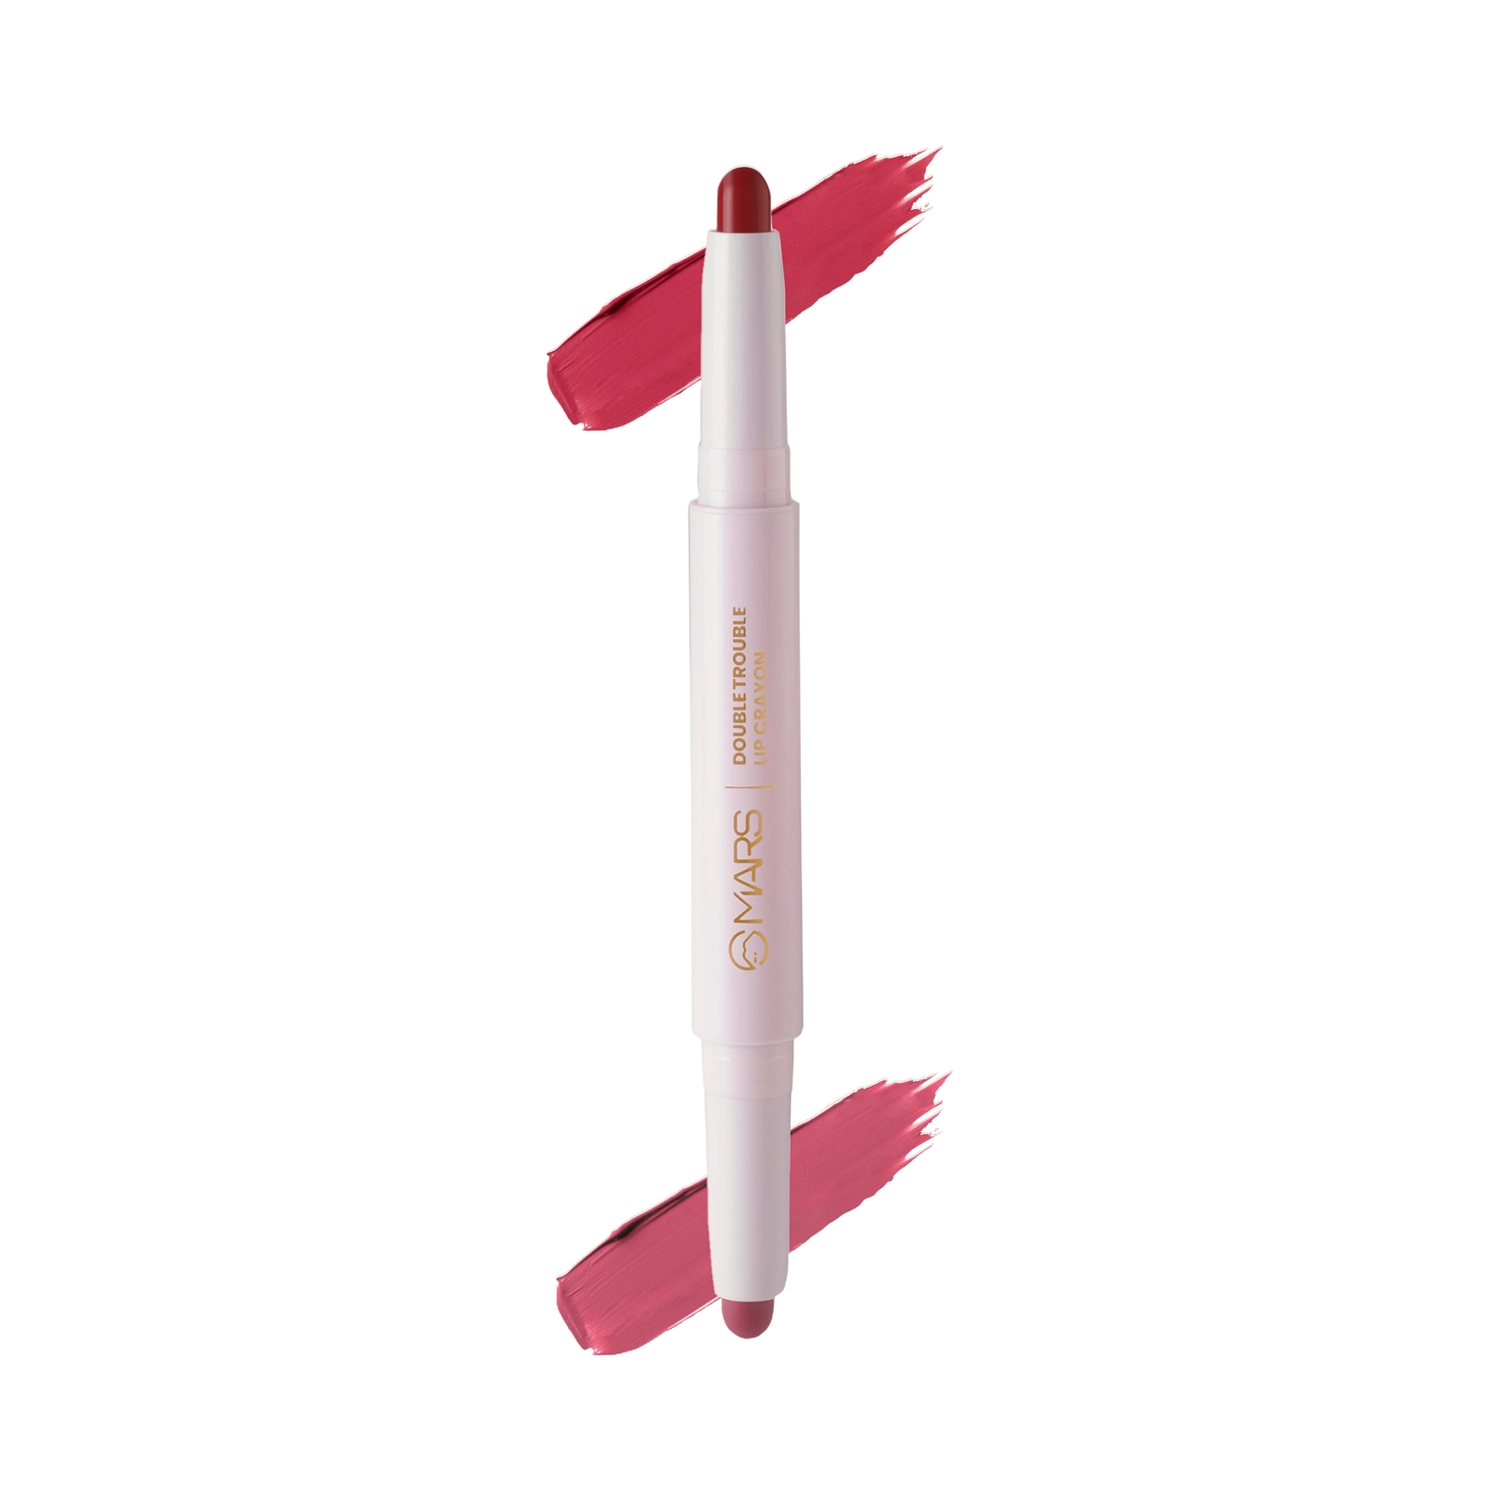 MARS | MARS Double Trouble Lip Crayon - 02 Rose Punch (4g)